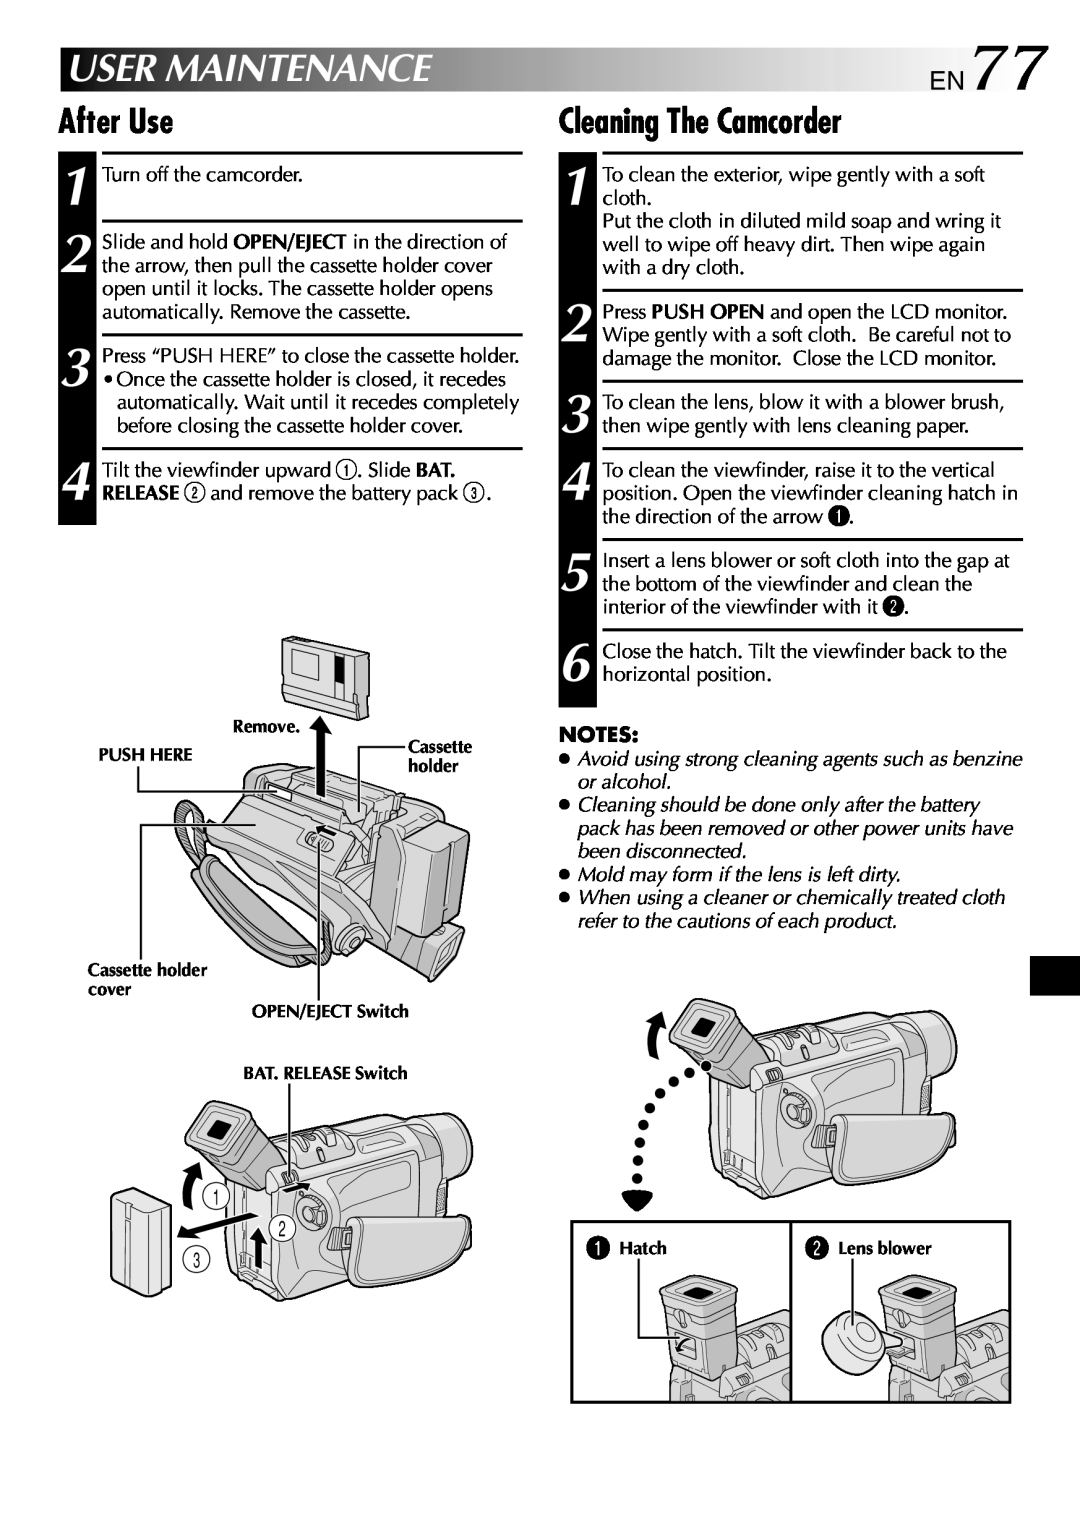 JVC GR-DVL512 specifications User Maintenance, After Use, Cleaning The Camcorder, EN77, Remove, Push Here, holder, 1Hatch 